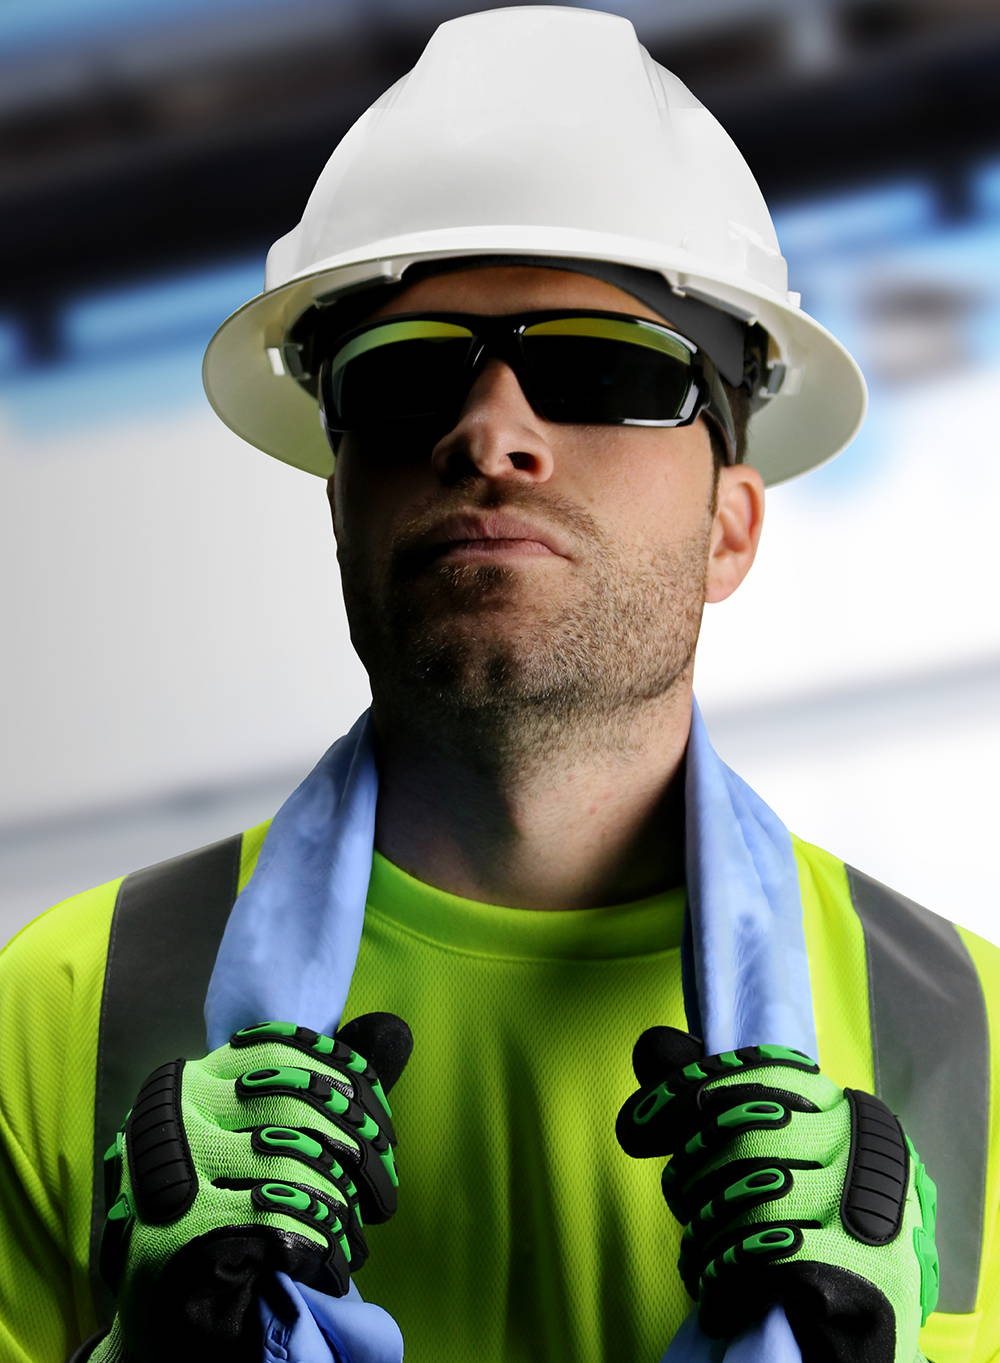 Construction worker wearing Hi-viz lime safety shirt, and white hard hat holding blue cooling towel around neck with dark safety glasses. He is also wearing green impact resistant gloves.